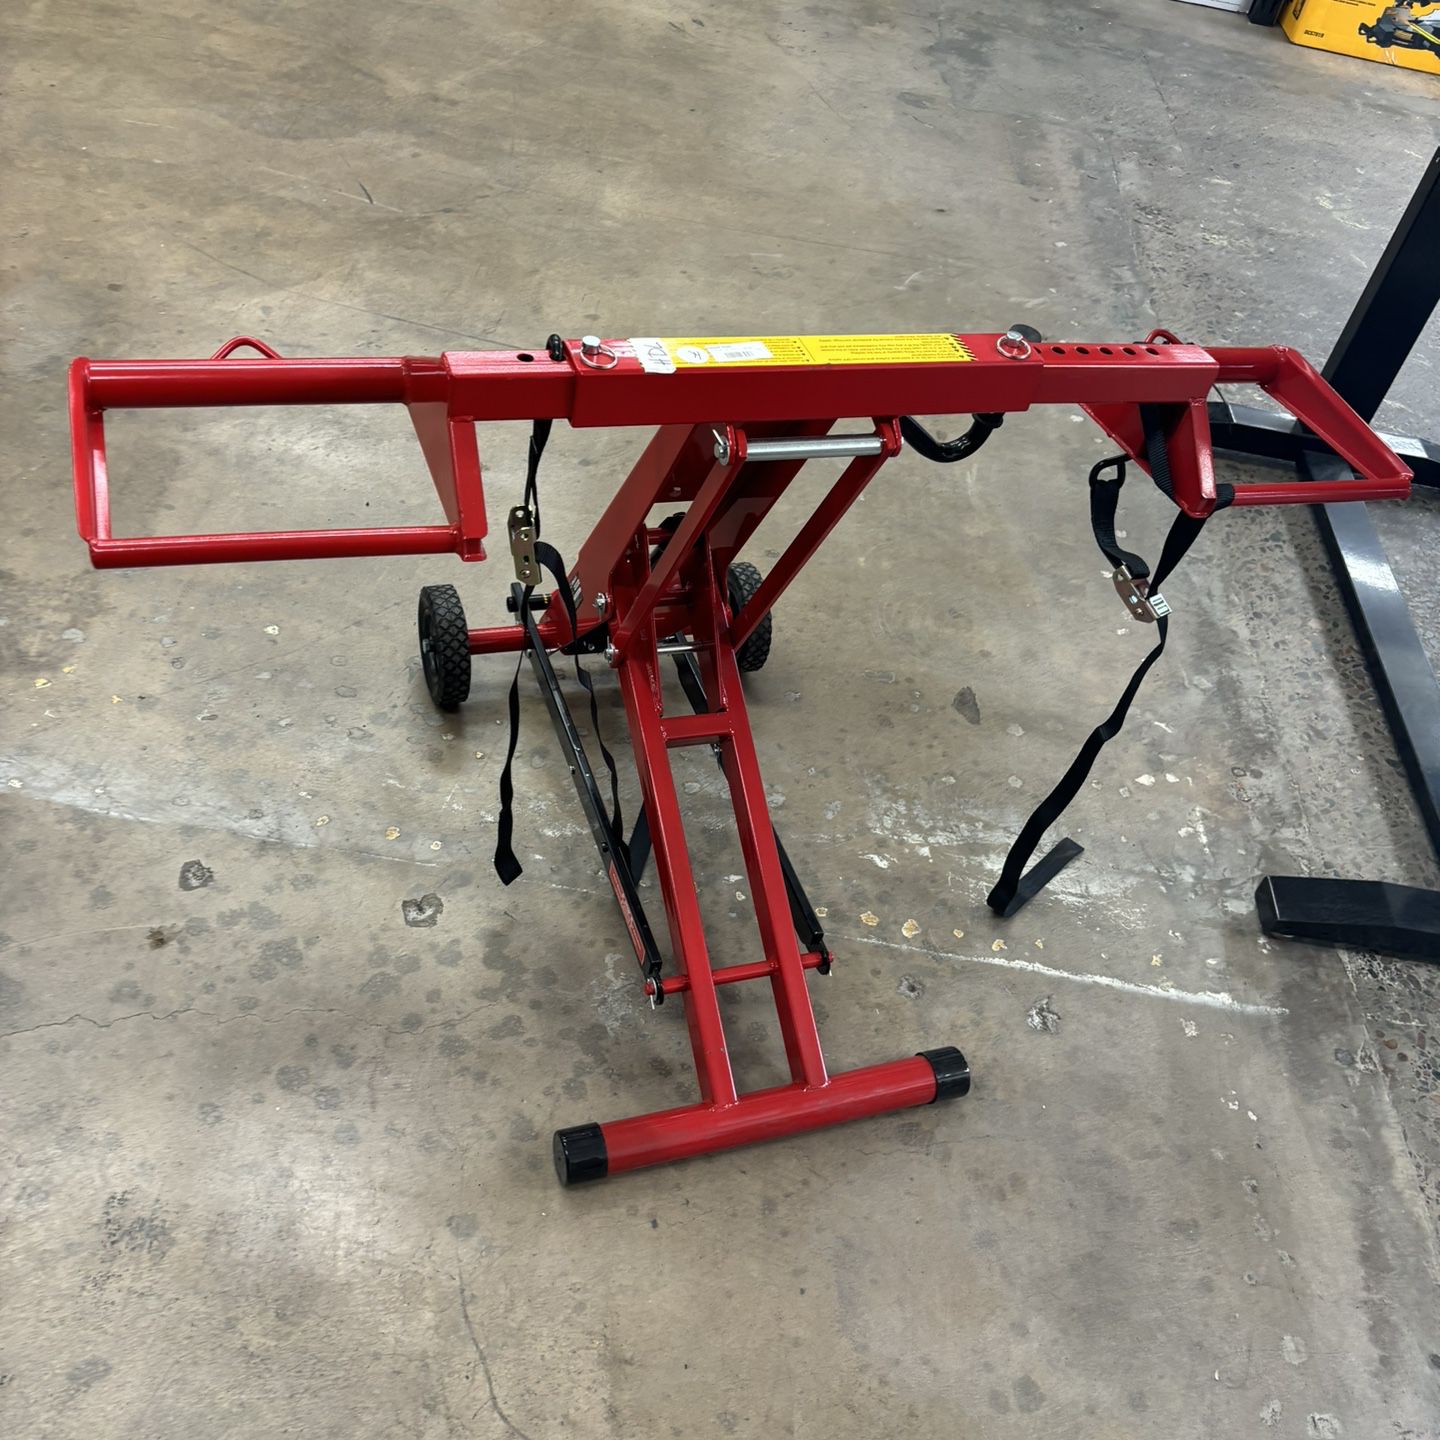 (New & On Sale!) HDL 500 Lawn Mower Lift